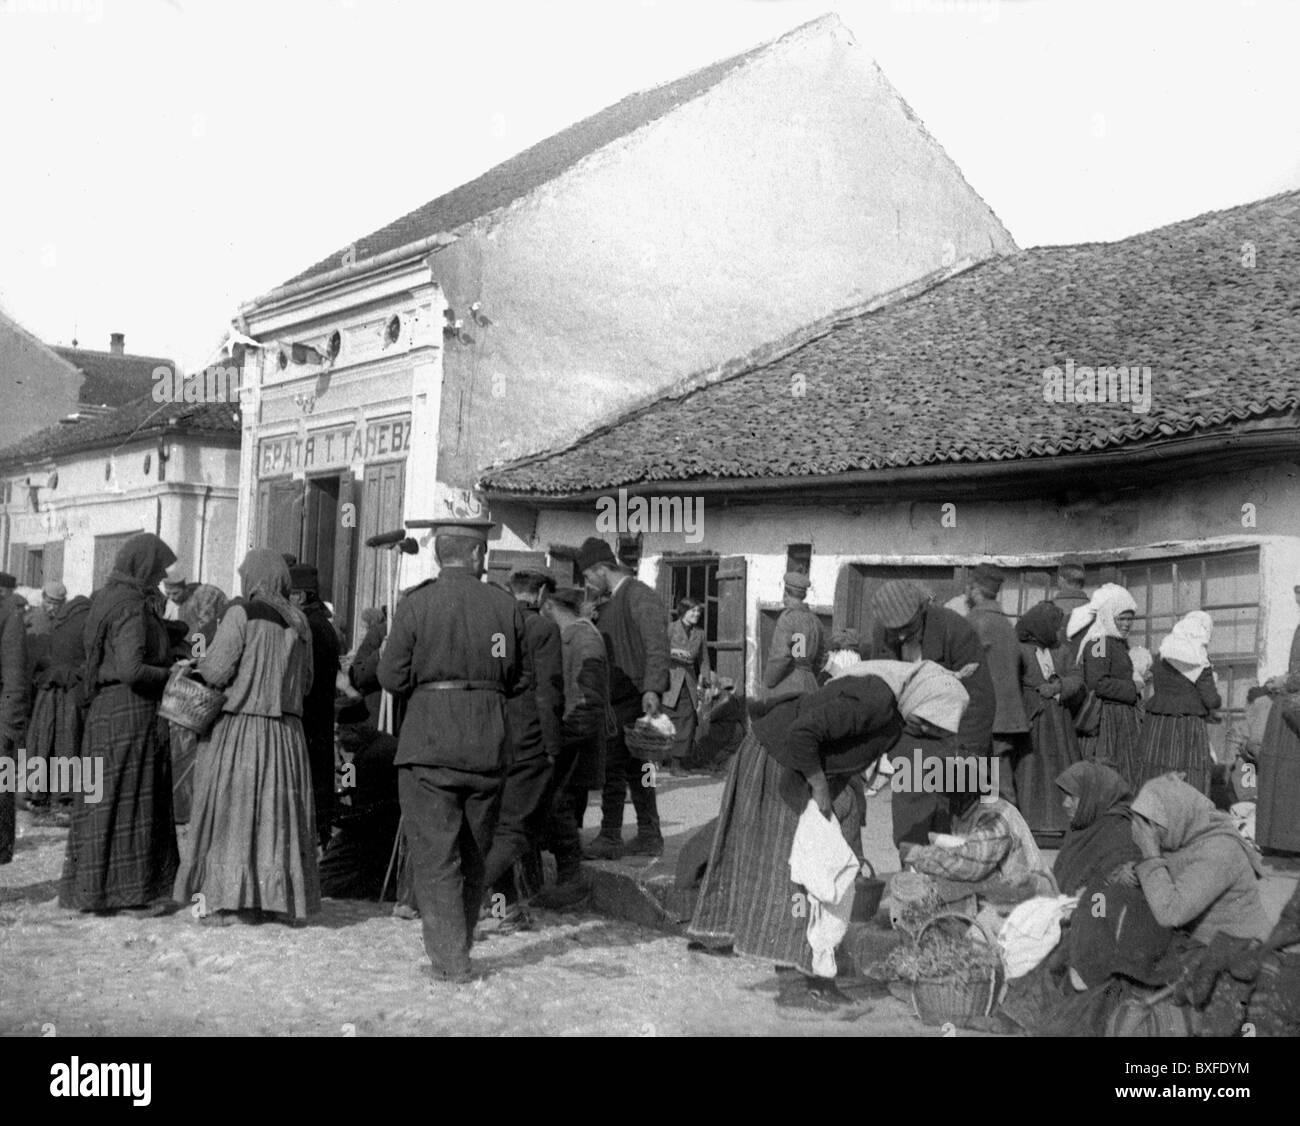 events, First World War / WWI, Balkans, German military officer in a market in Macedonia, circa 1916/1917, Additional-Rights-Clearences-Not Available Stock Photo